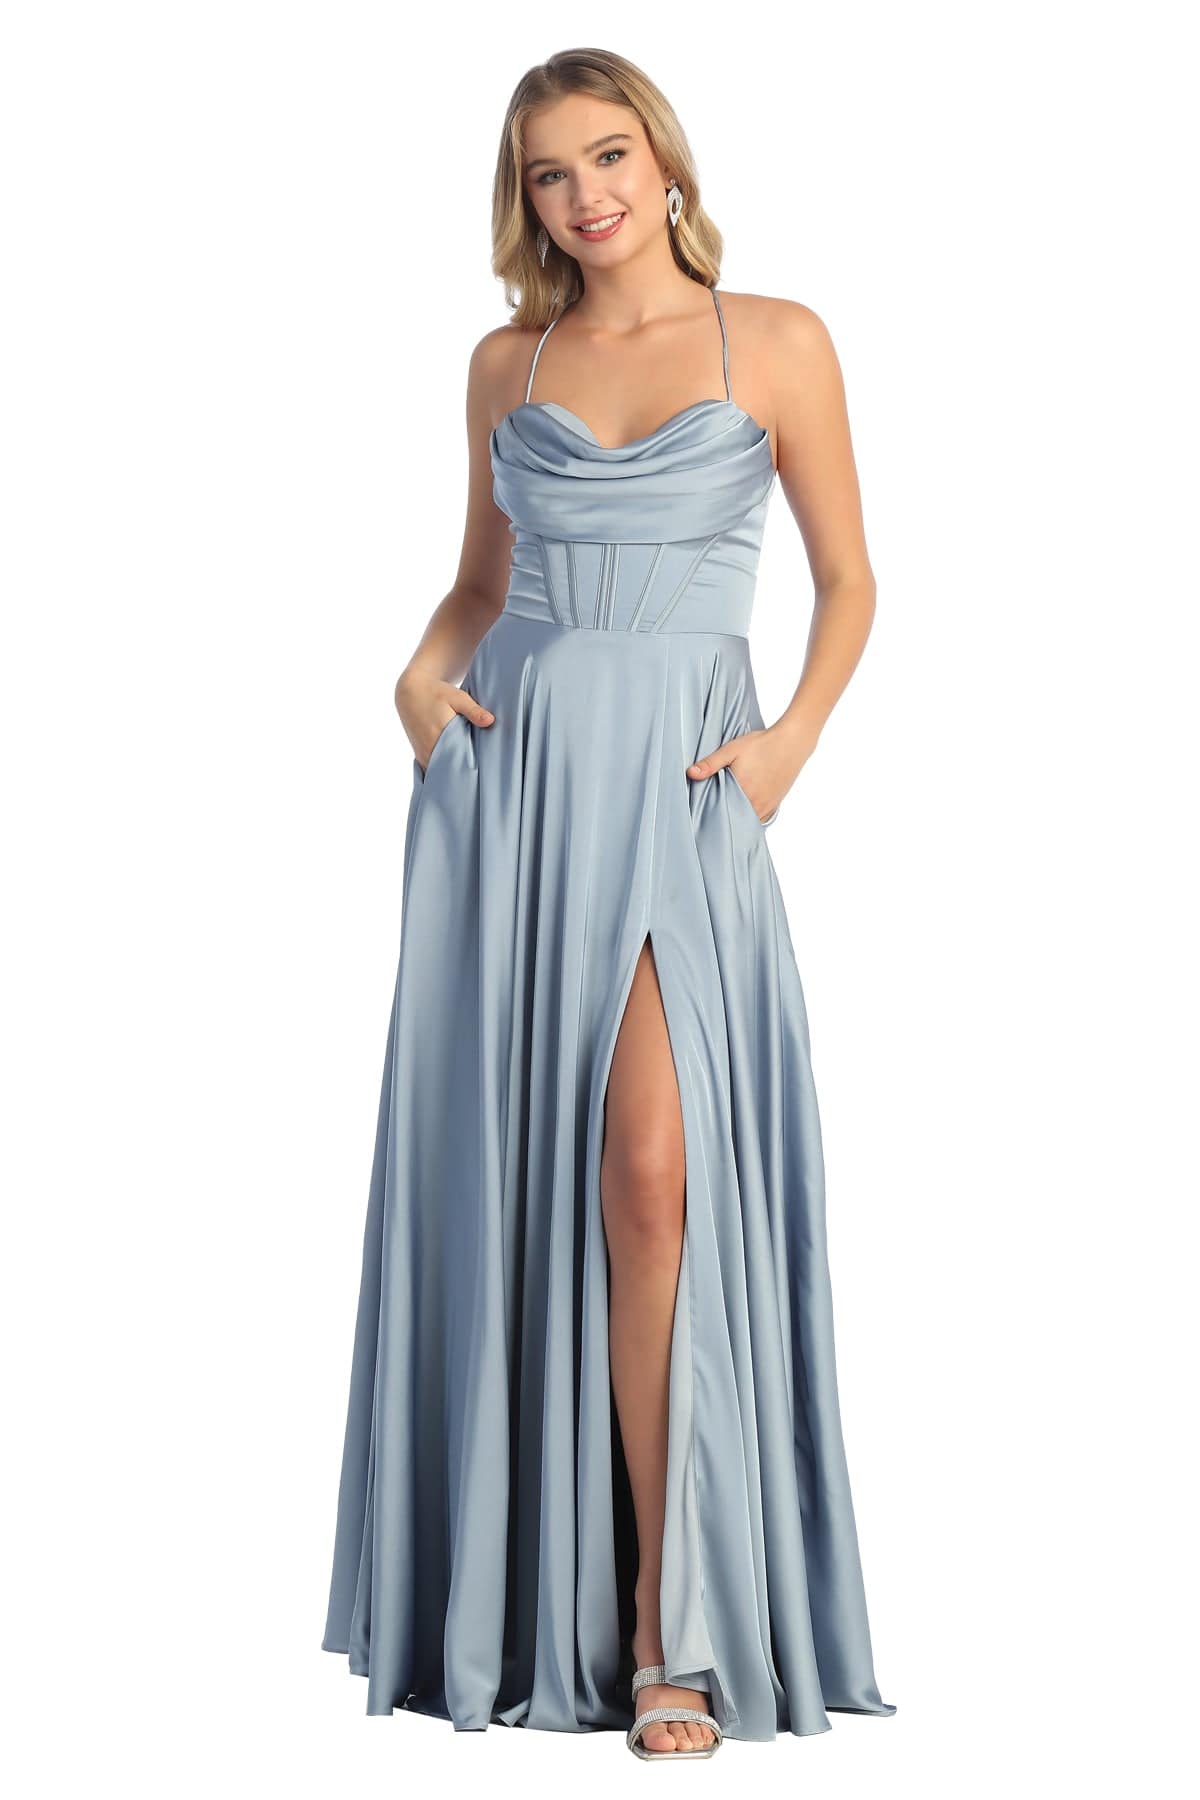 Cindy Collection 50445 Mother of the Bride Dress